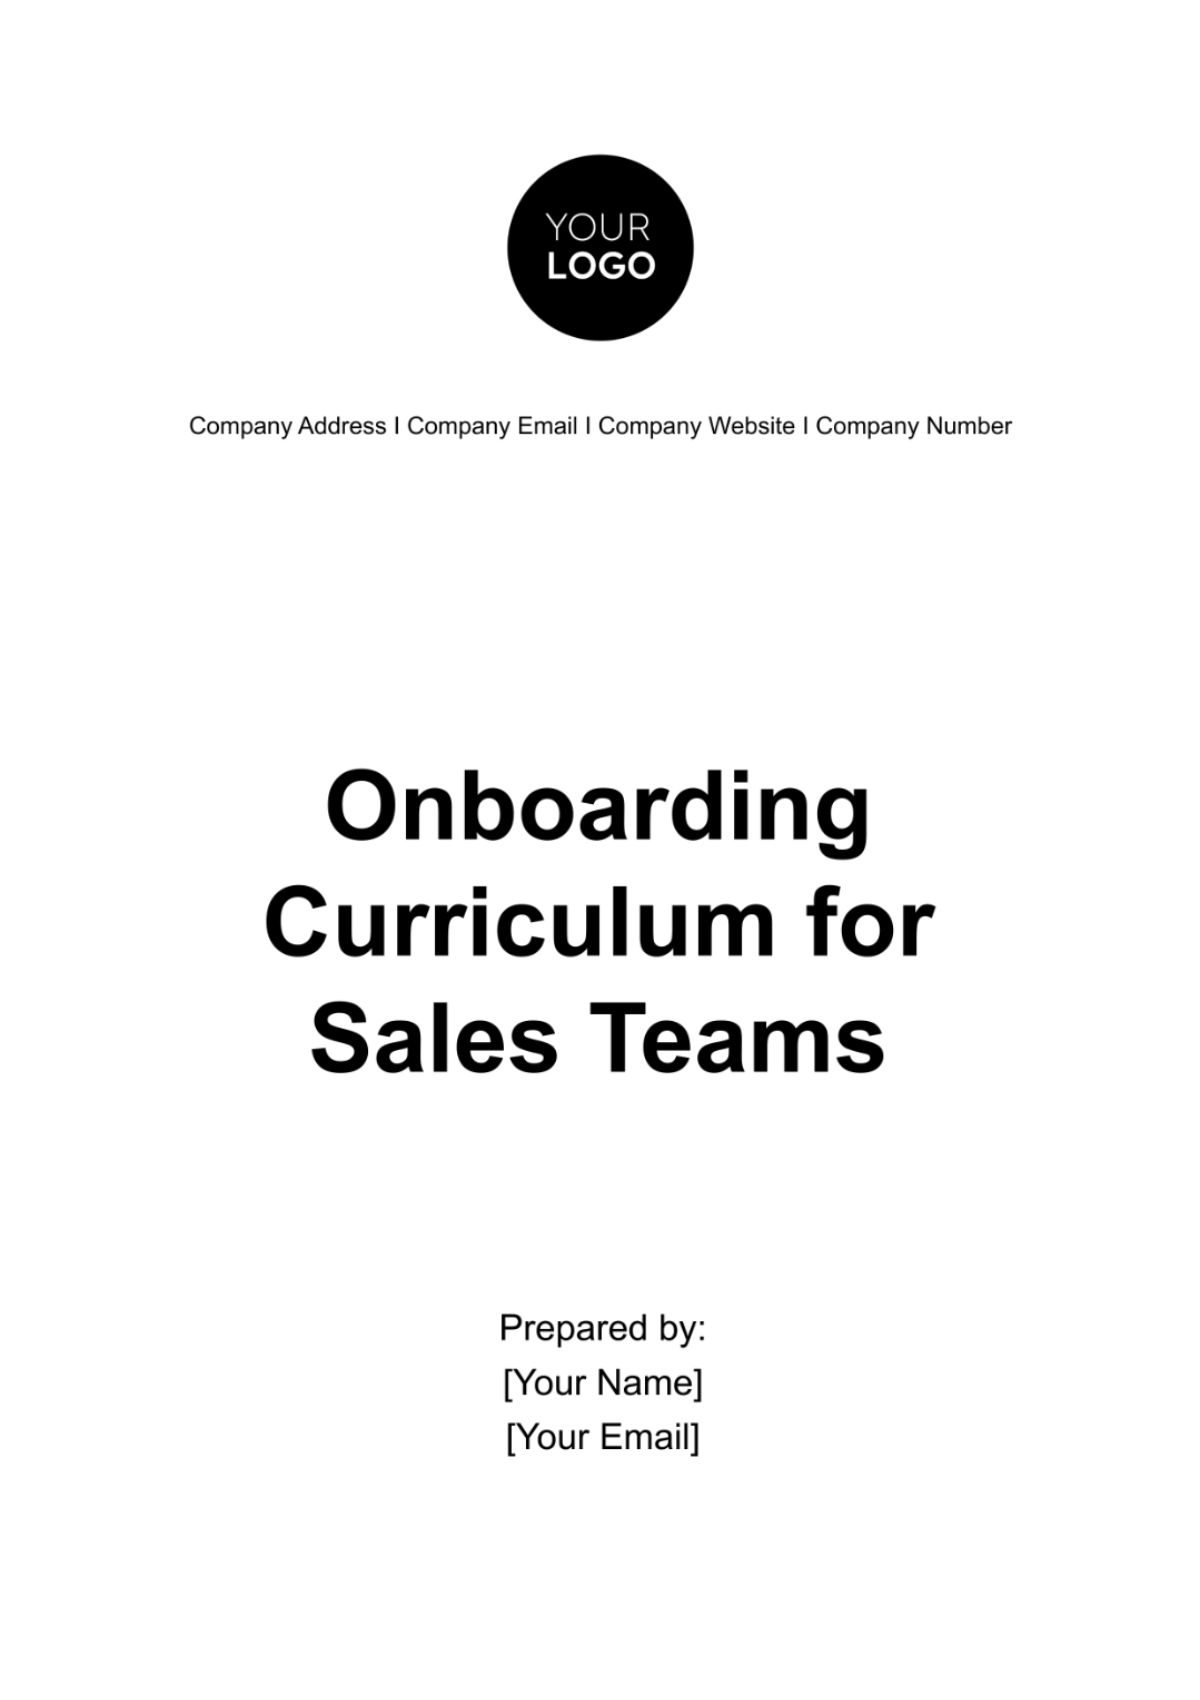 Free Onboarding Curriculum for Sales Teams Template